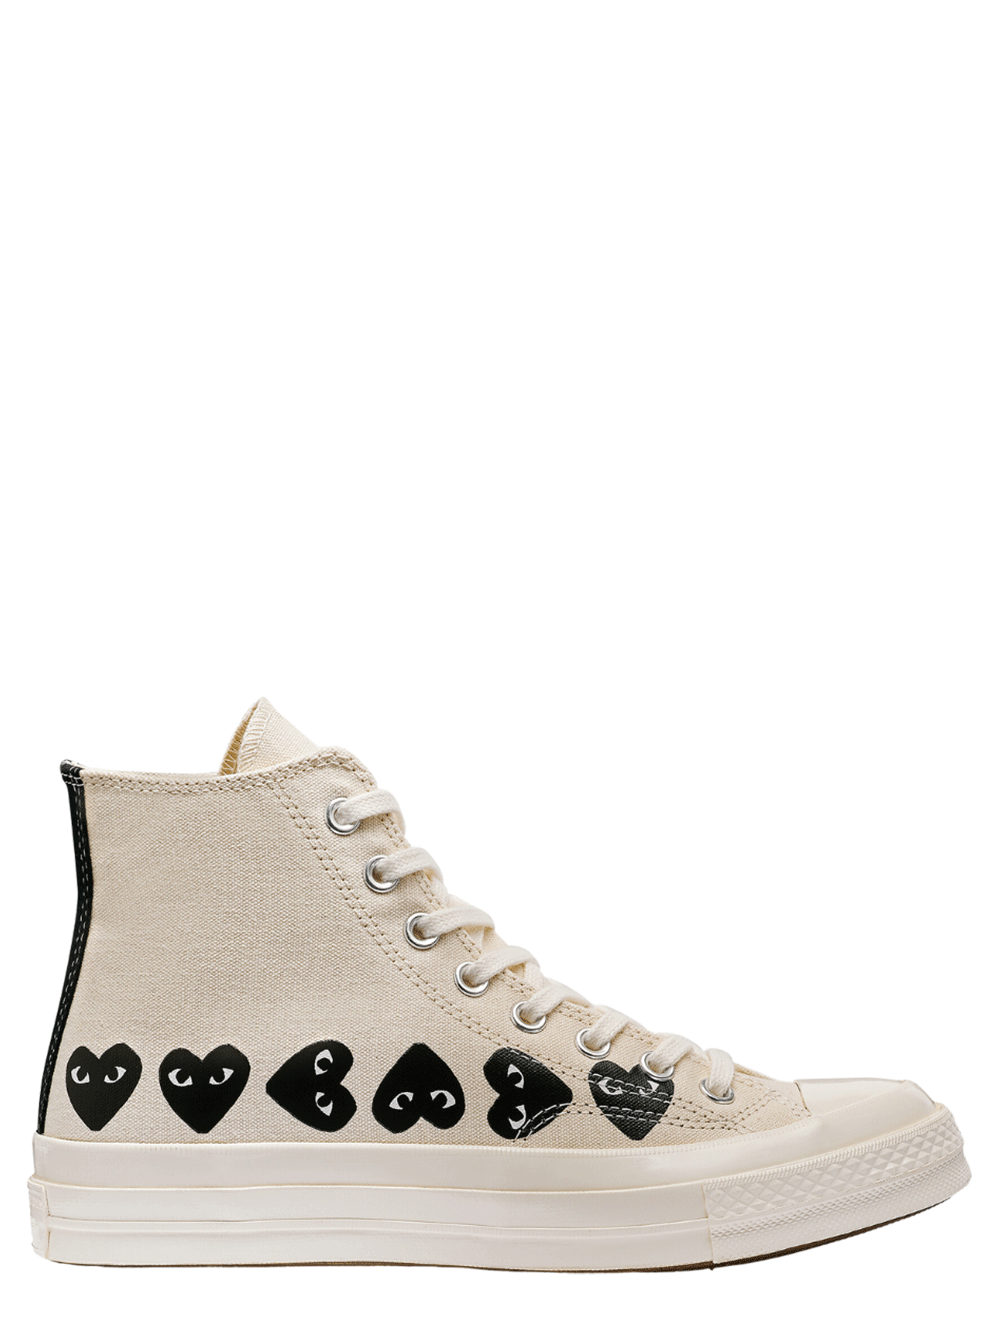 COMME-des-GARCONS-PLAY-CONVERSE-MULTI-HEART-Chuck-Taylor-All-Star-_70-High-Sneakers-White-1